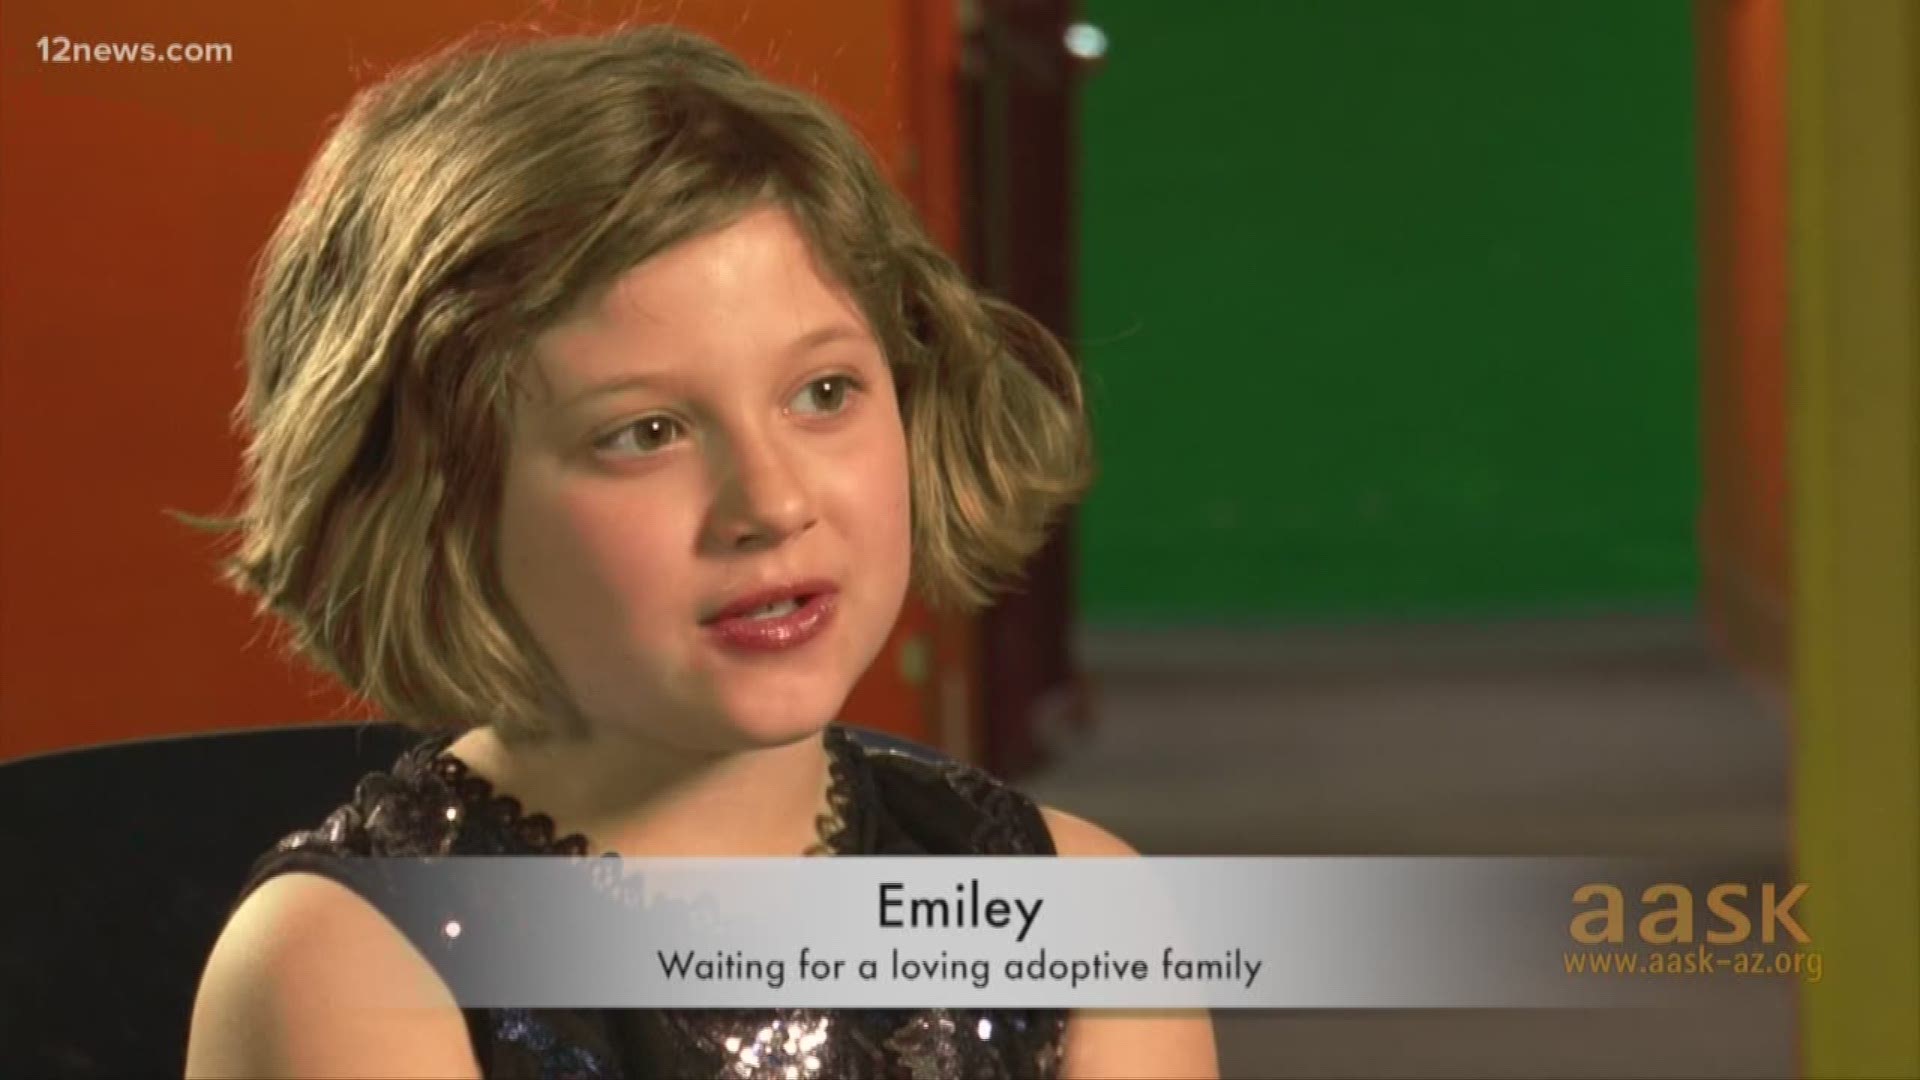 Emiley is an upbeat 8-year-old who loves to dance, read and can't wait for her forever family.